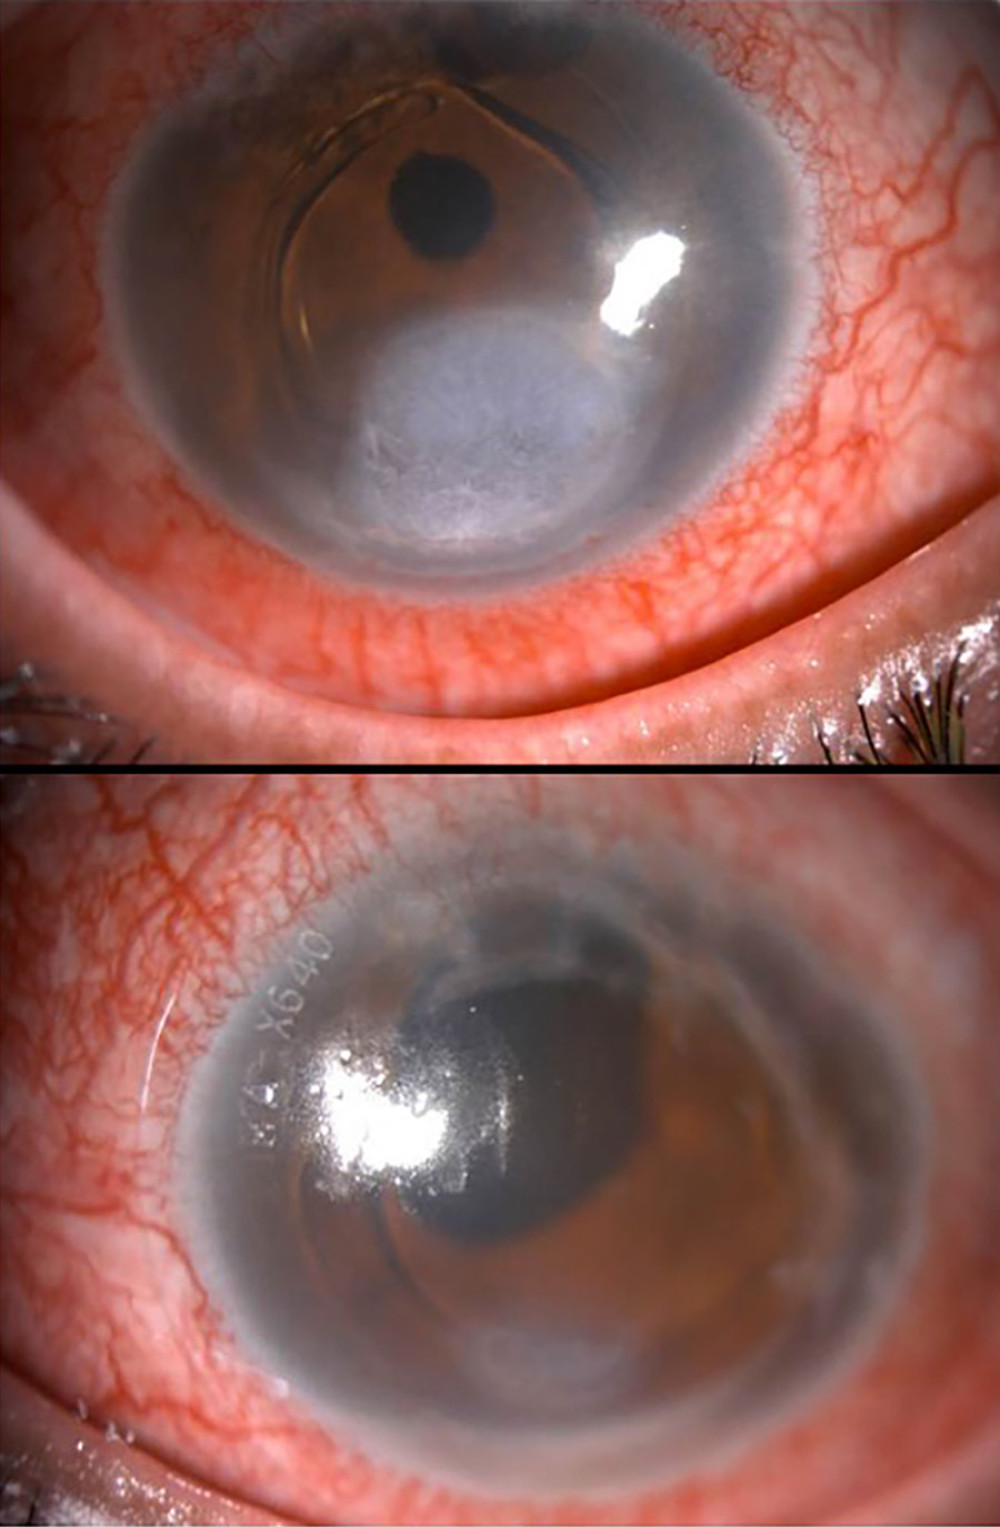 Corneal epithelial defect right eye: 4 mm vertical×4 mm horizontal with rolled edges and left eye: 2 mm vertical×1 mm horizontal.